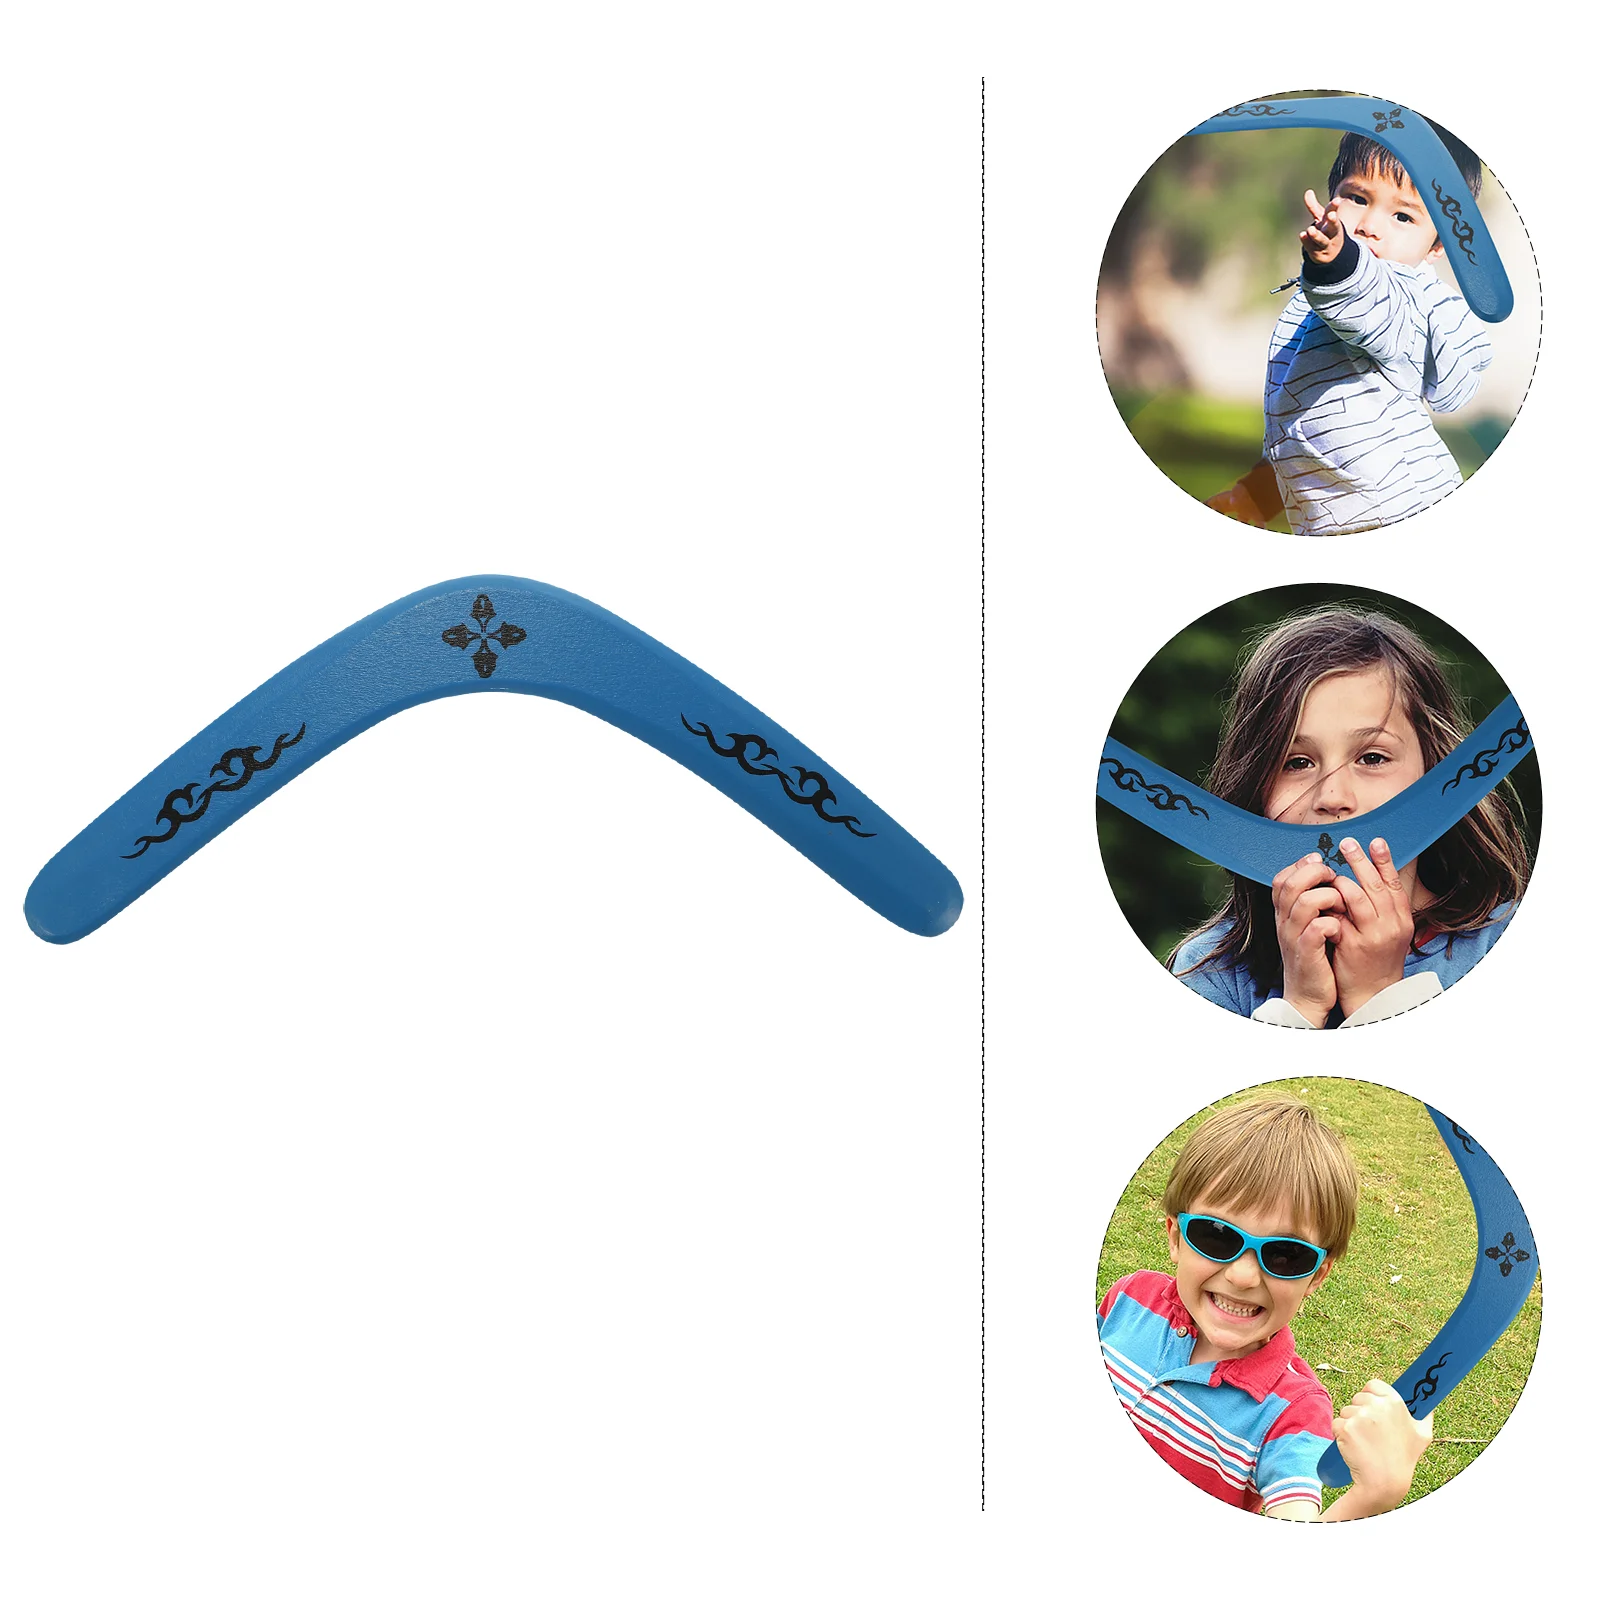 

Educational Toys Outdoor Toddlers Boomerang Kids Major V-shaped Wooden Children Playthings Creative Dart